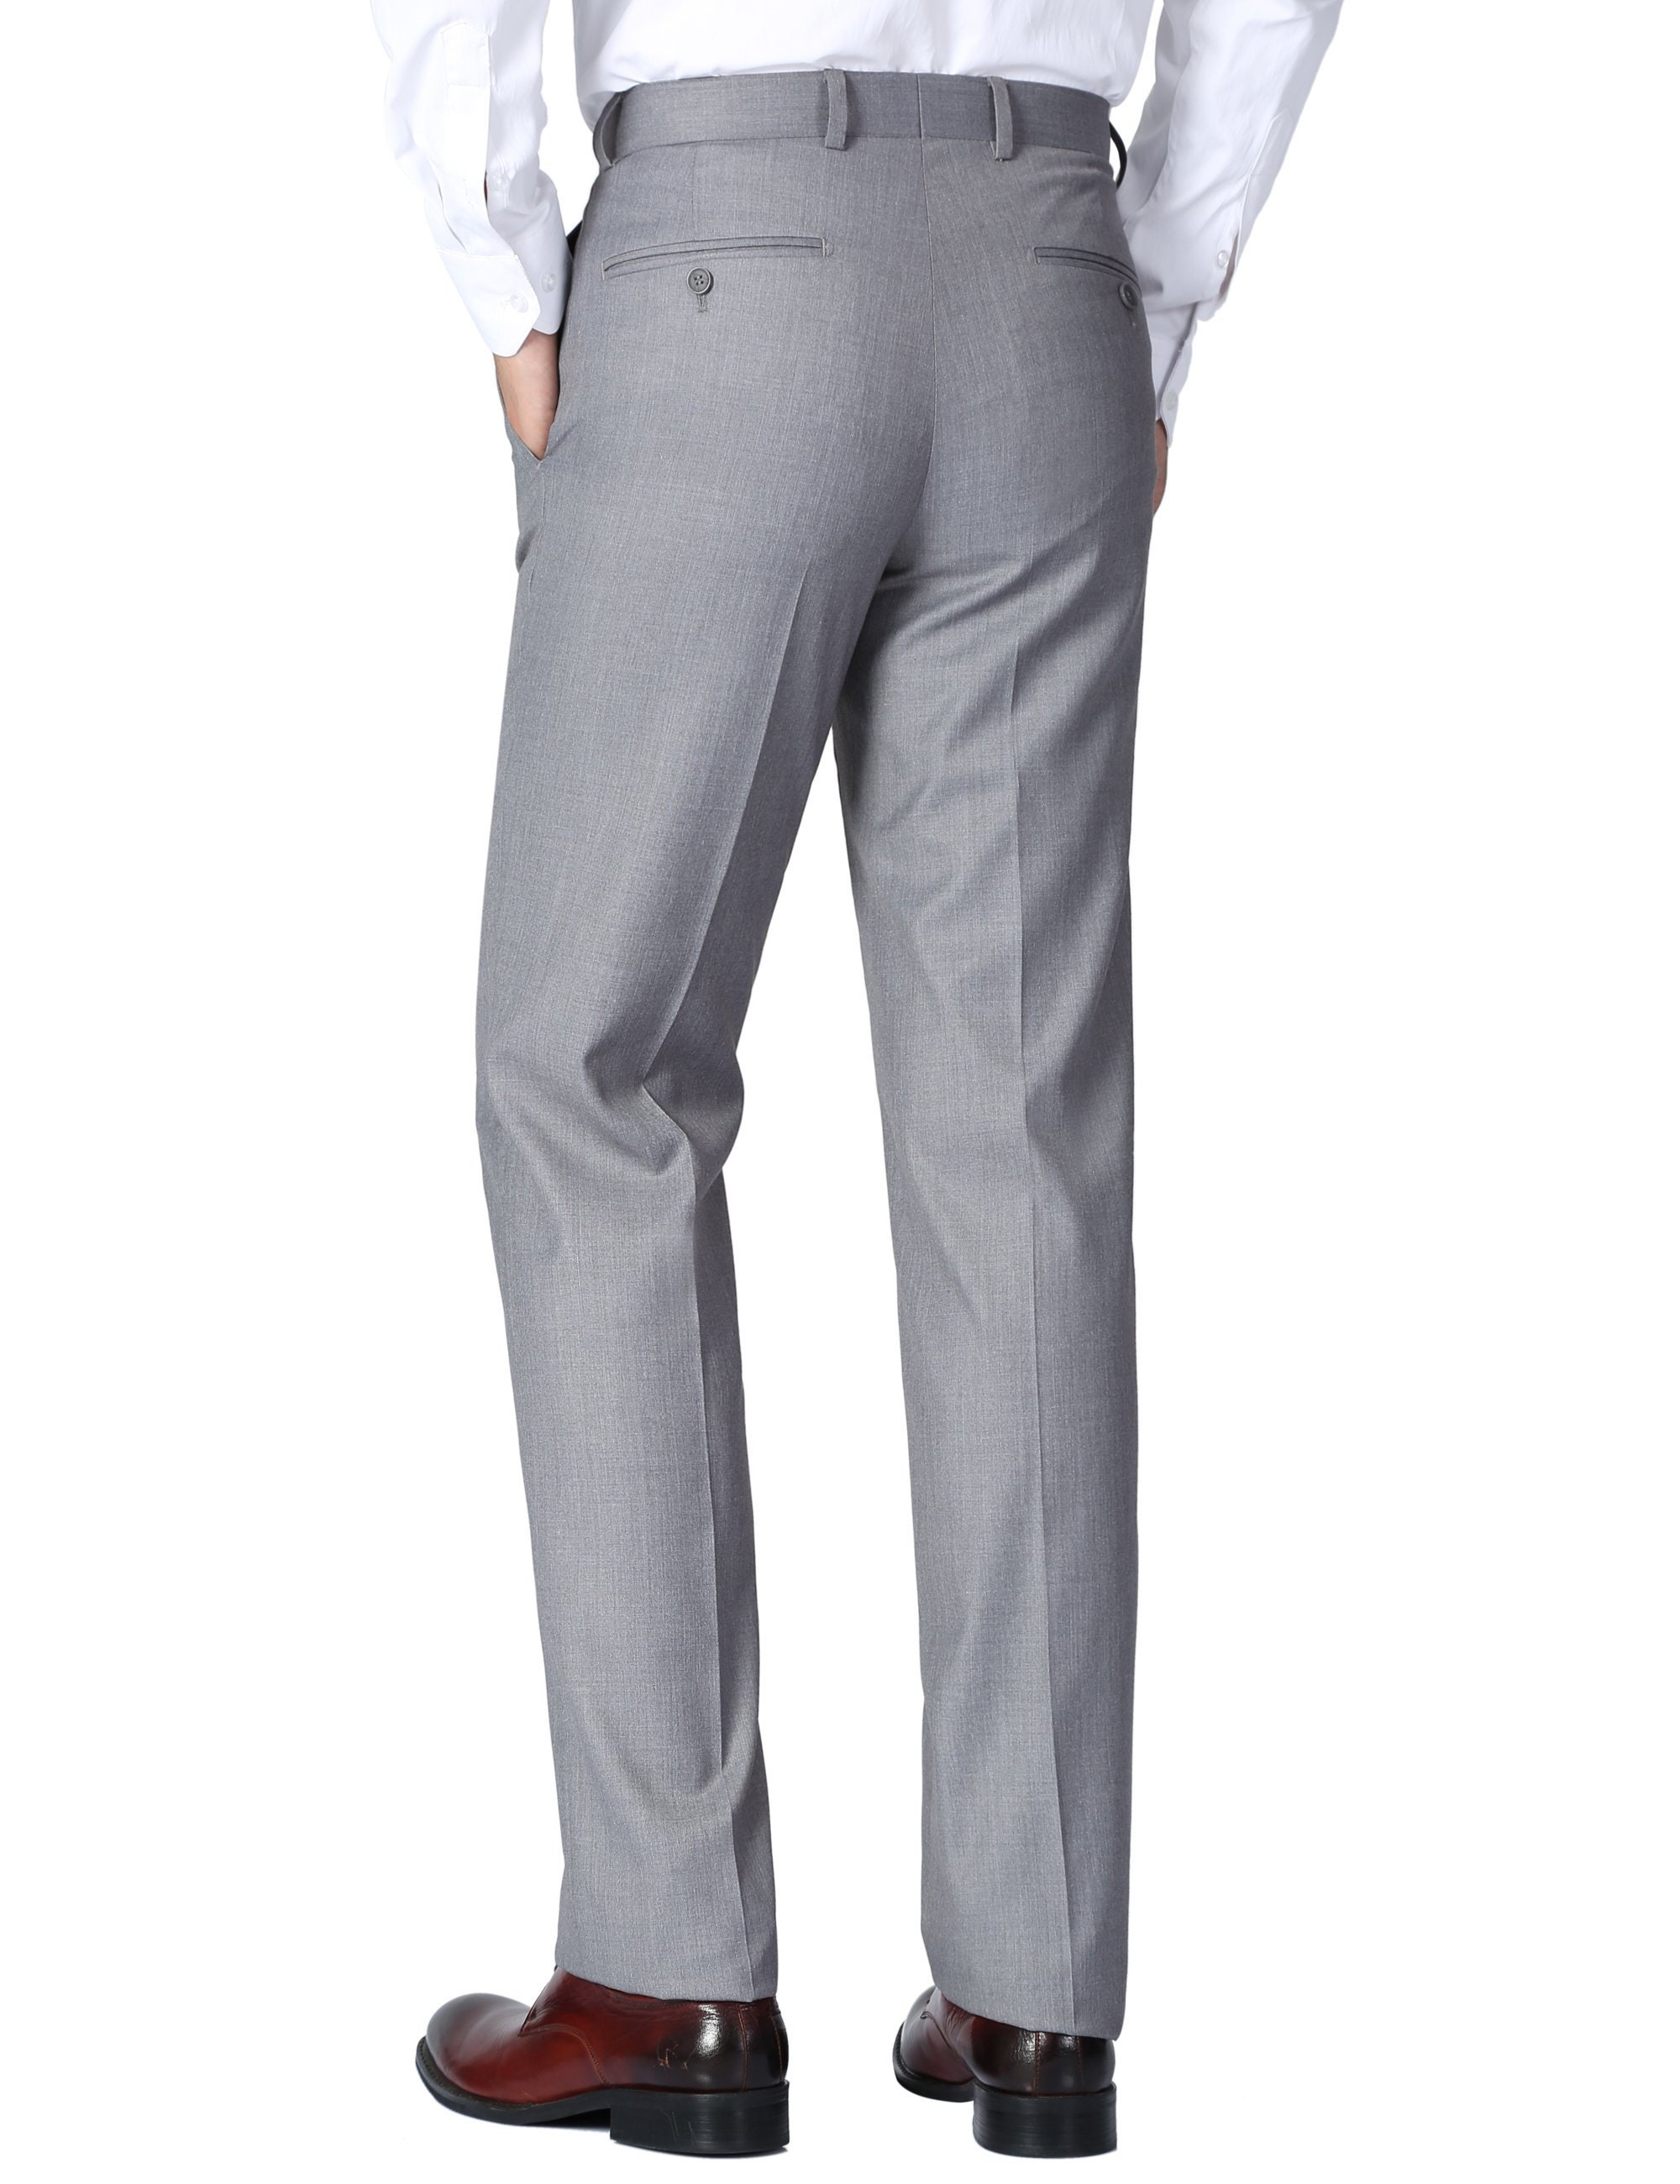 Men's Slim Fit Dress Pants Perfect for Weddings, Parties, Everyday, and  Other Milestones 